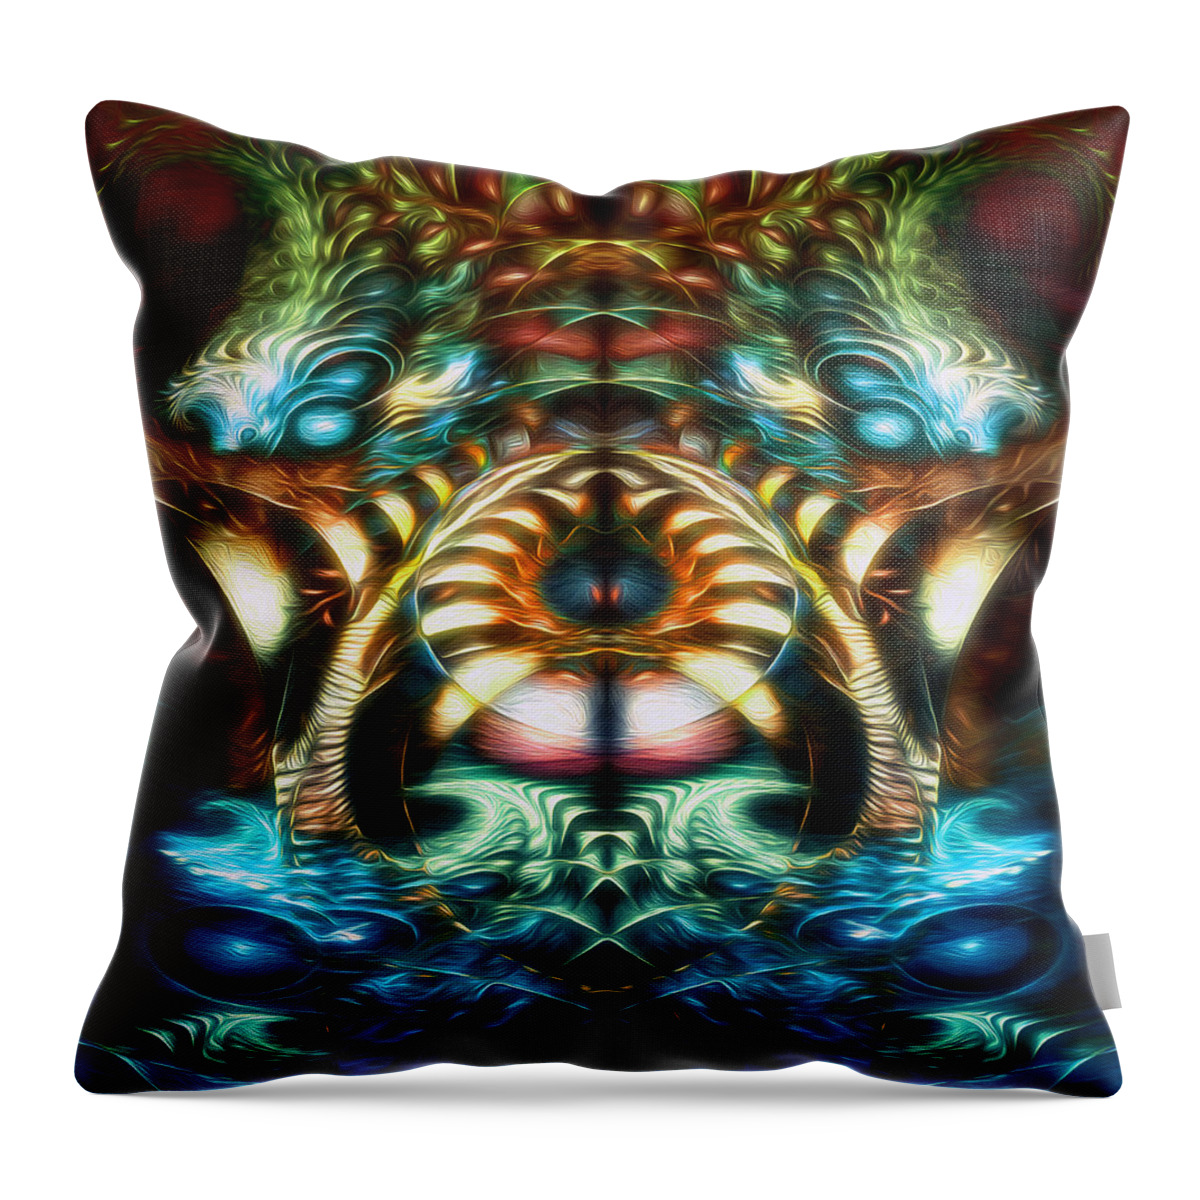 Stairs Throw Pillow featuring the digital art Dichotomy by Jeff Malderez